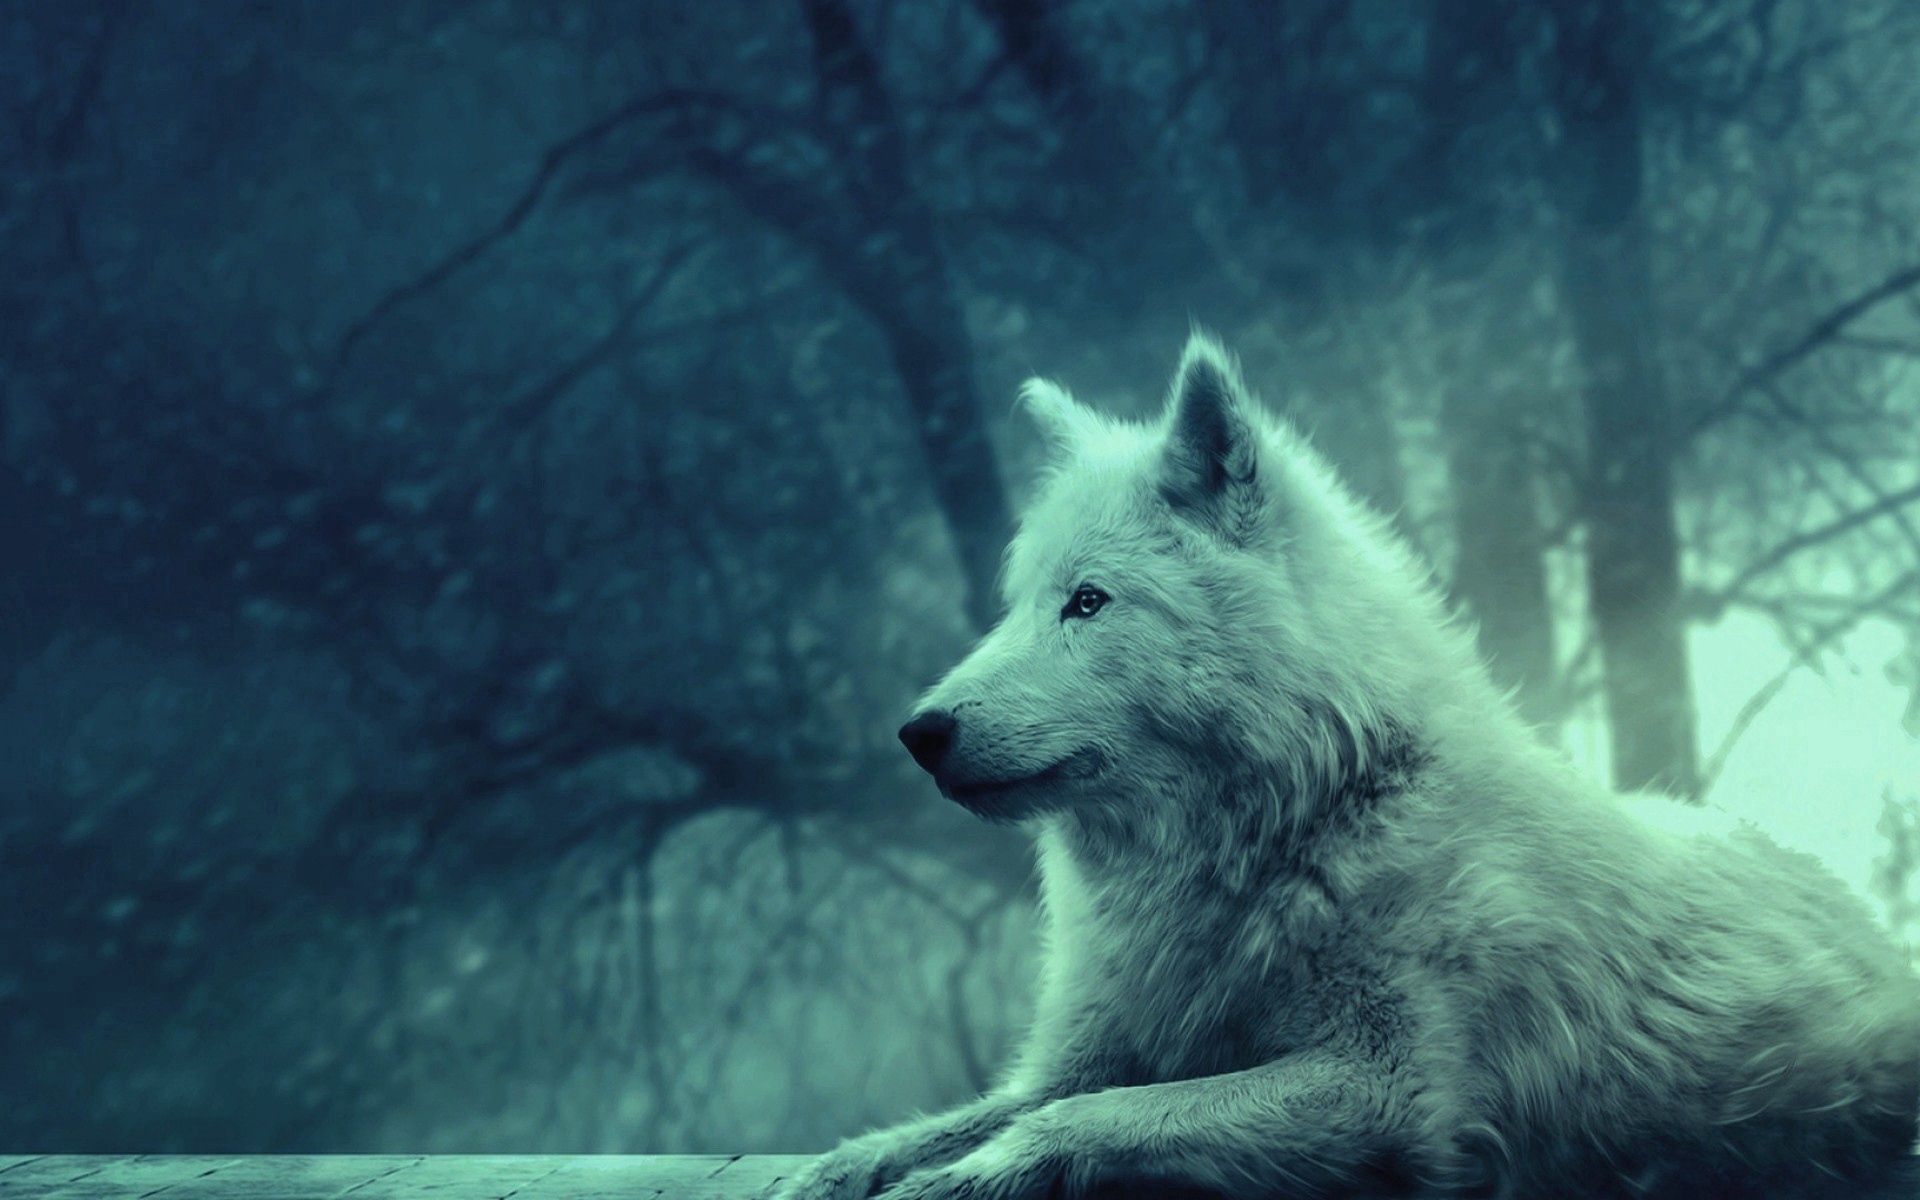 97559 download wallpaper wolf, light, animals, forest, light coloured, wild, calmness, tranquillity, appeasement, pacification screensavers and pictures for free